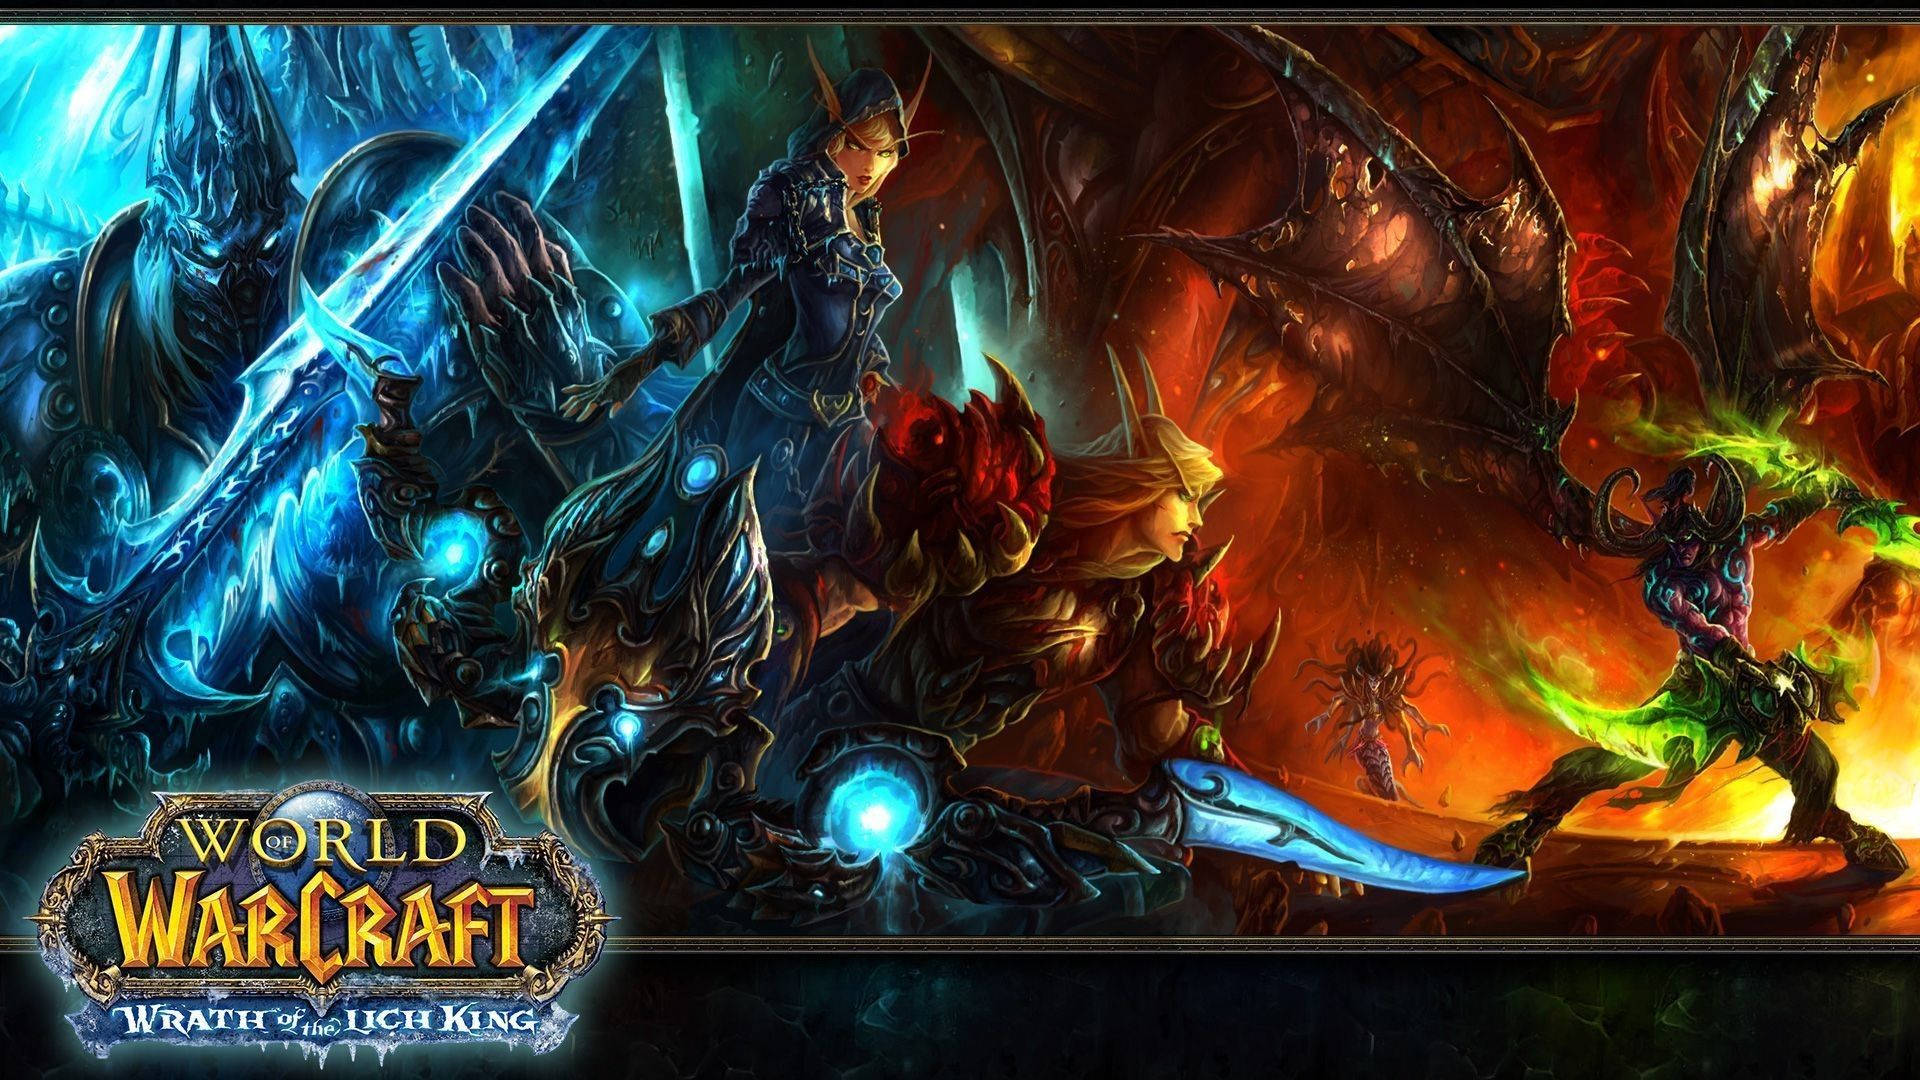 Explore the world of Azeroth during the Wrath of the Lich King, Alliance Edition. Wallpaper